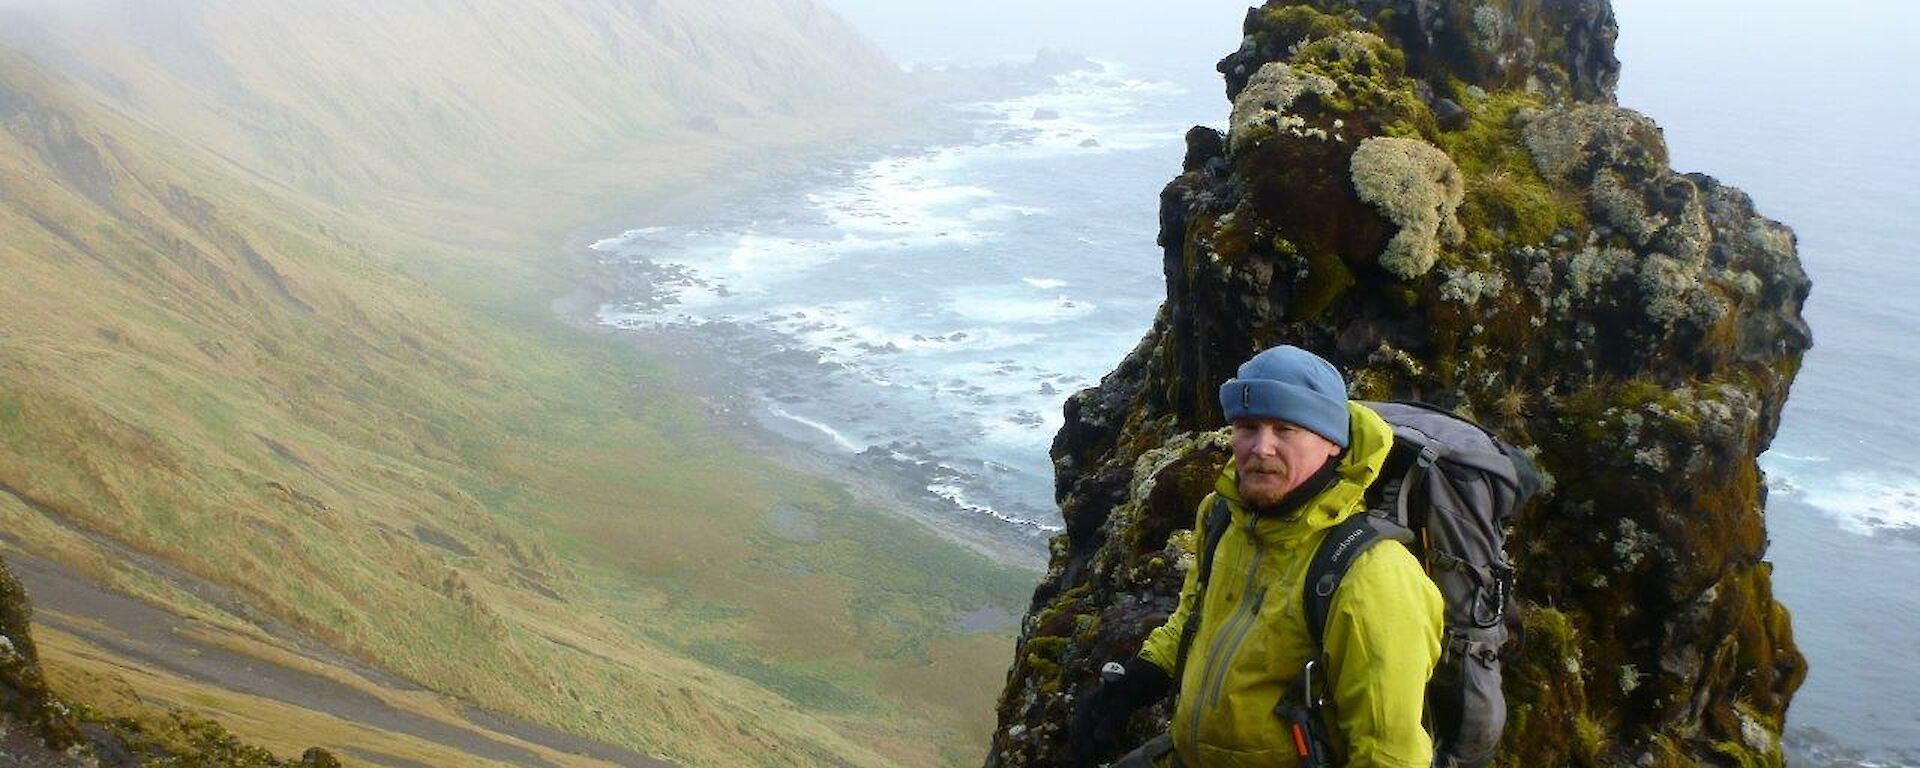 Chris Howard, Macca Ranger In Charge, at the top of a Macca ‘jump up/down’ ( a route between the escarpment and the coast)